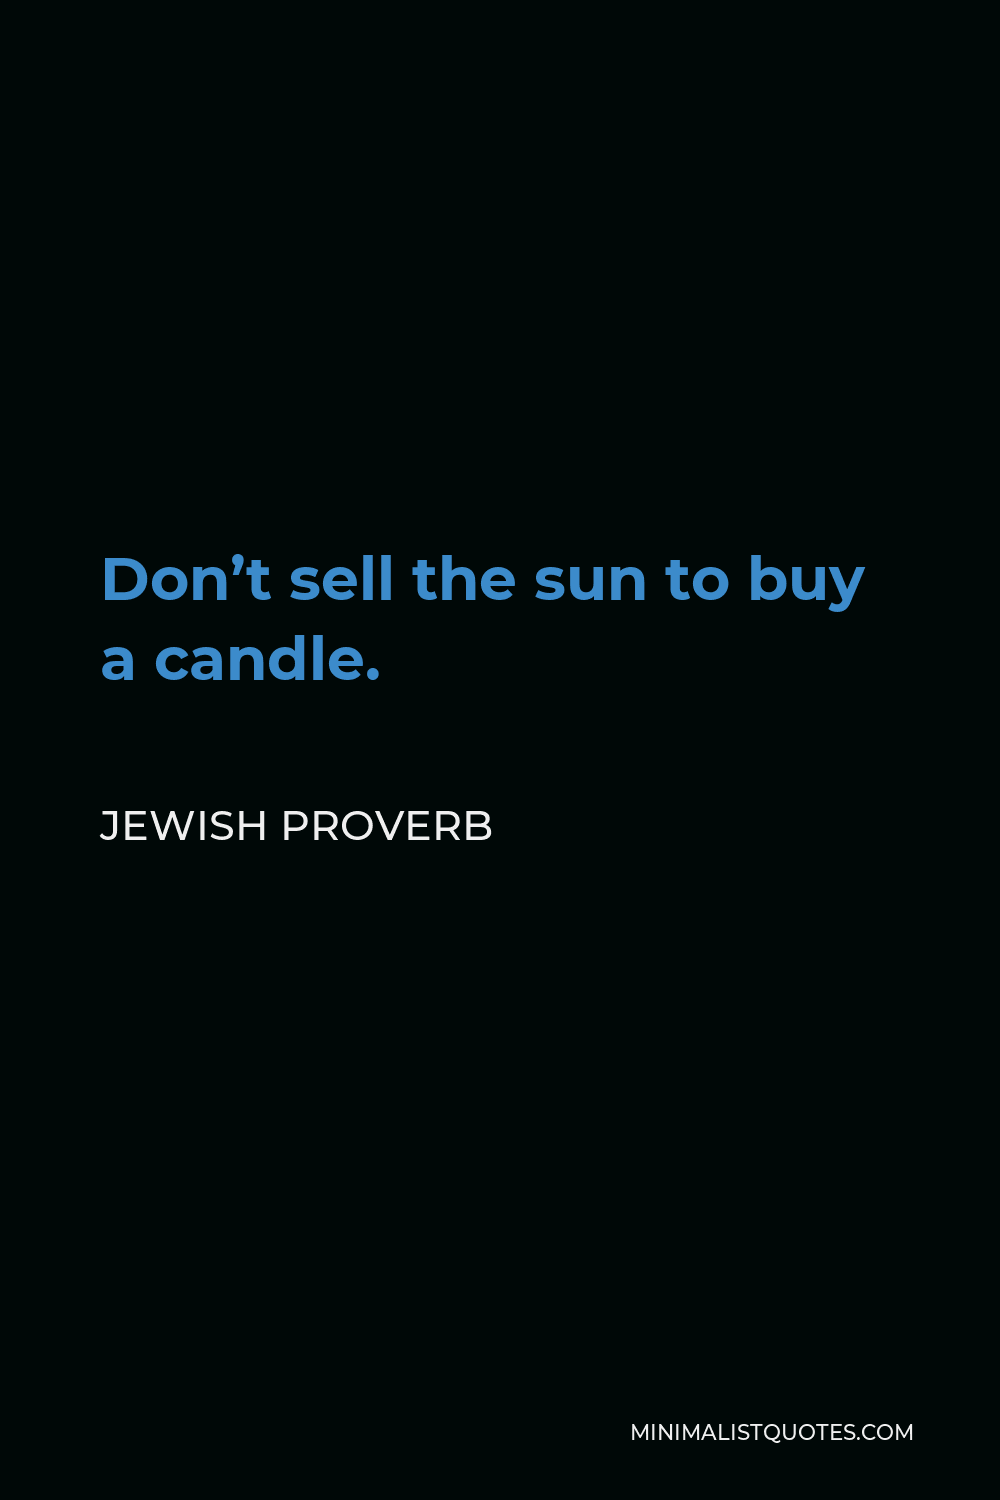 Jewish Proverb Quote - Don’t sell the sun to buy a candle.